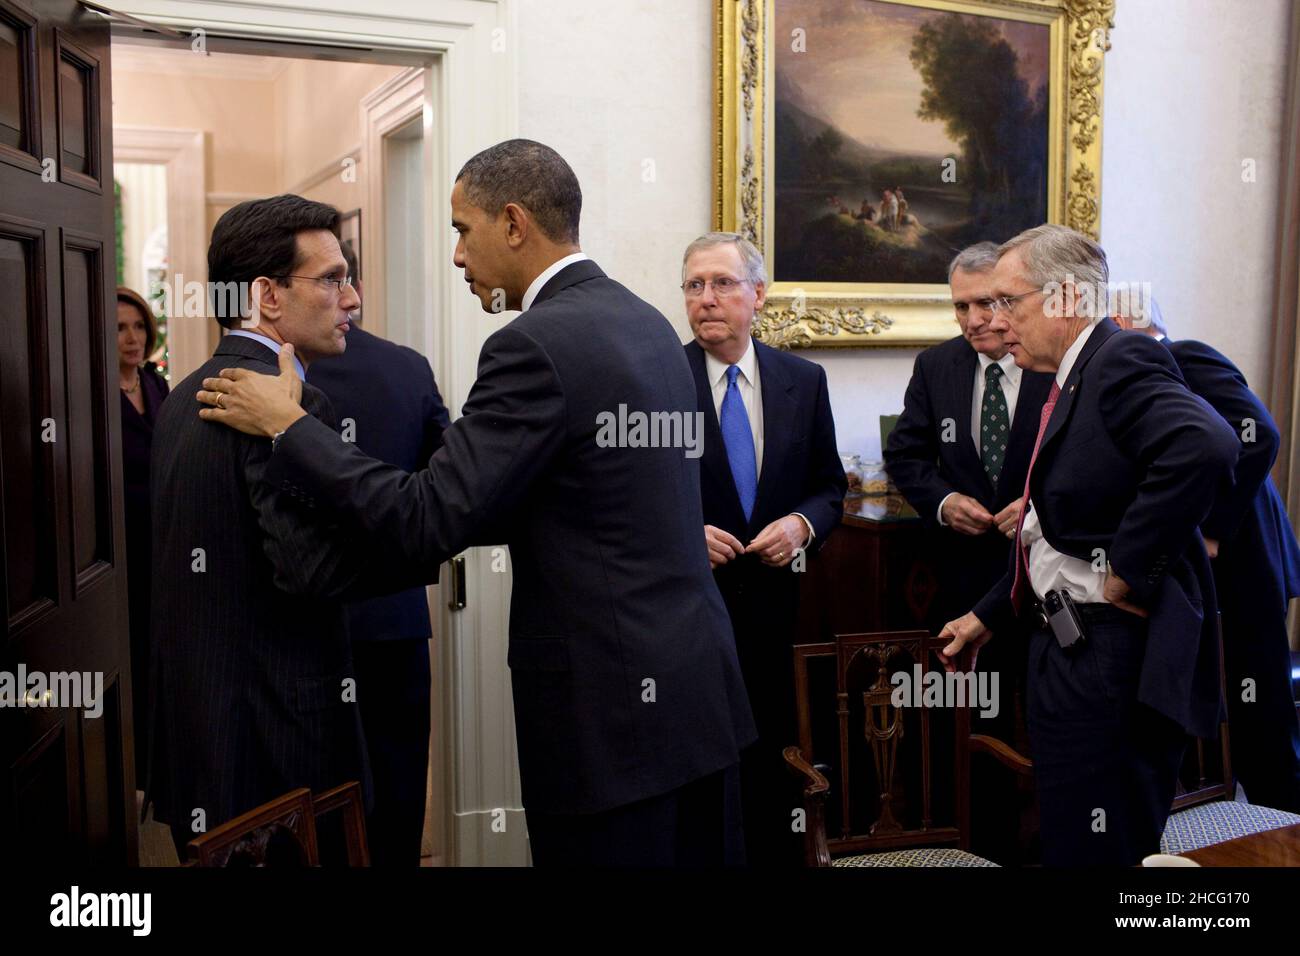 United States President Barack Obama talks with US Representative Eric Cantor (Republican of Virginia), US House Republican Whip, at the conclusion of a meeting with bipartisan Congressional leadership in the President's Private Dining Room, Tuesday, November 30, 2010. Listening at right are US Senate Republican Leader Mitch McConnell (Republican of Kentucky); US Senator Jon Kyl (Republican of Arizona) Senate Republican Whip; and US Senate Majority Leader Harry Reid (Democrat of Nevada). Mandatory Credit: Pete Souza - White House via CNP Stock Photo